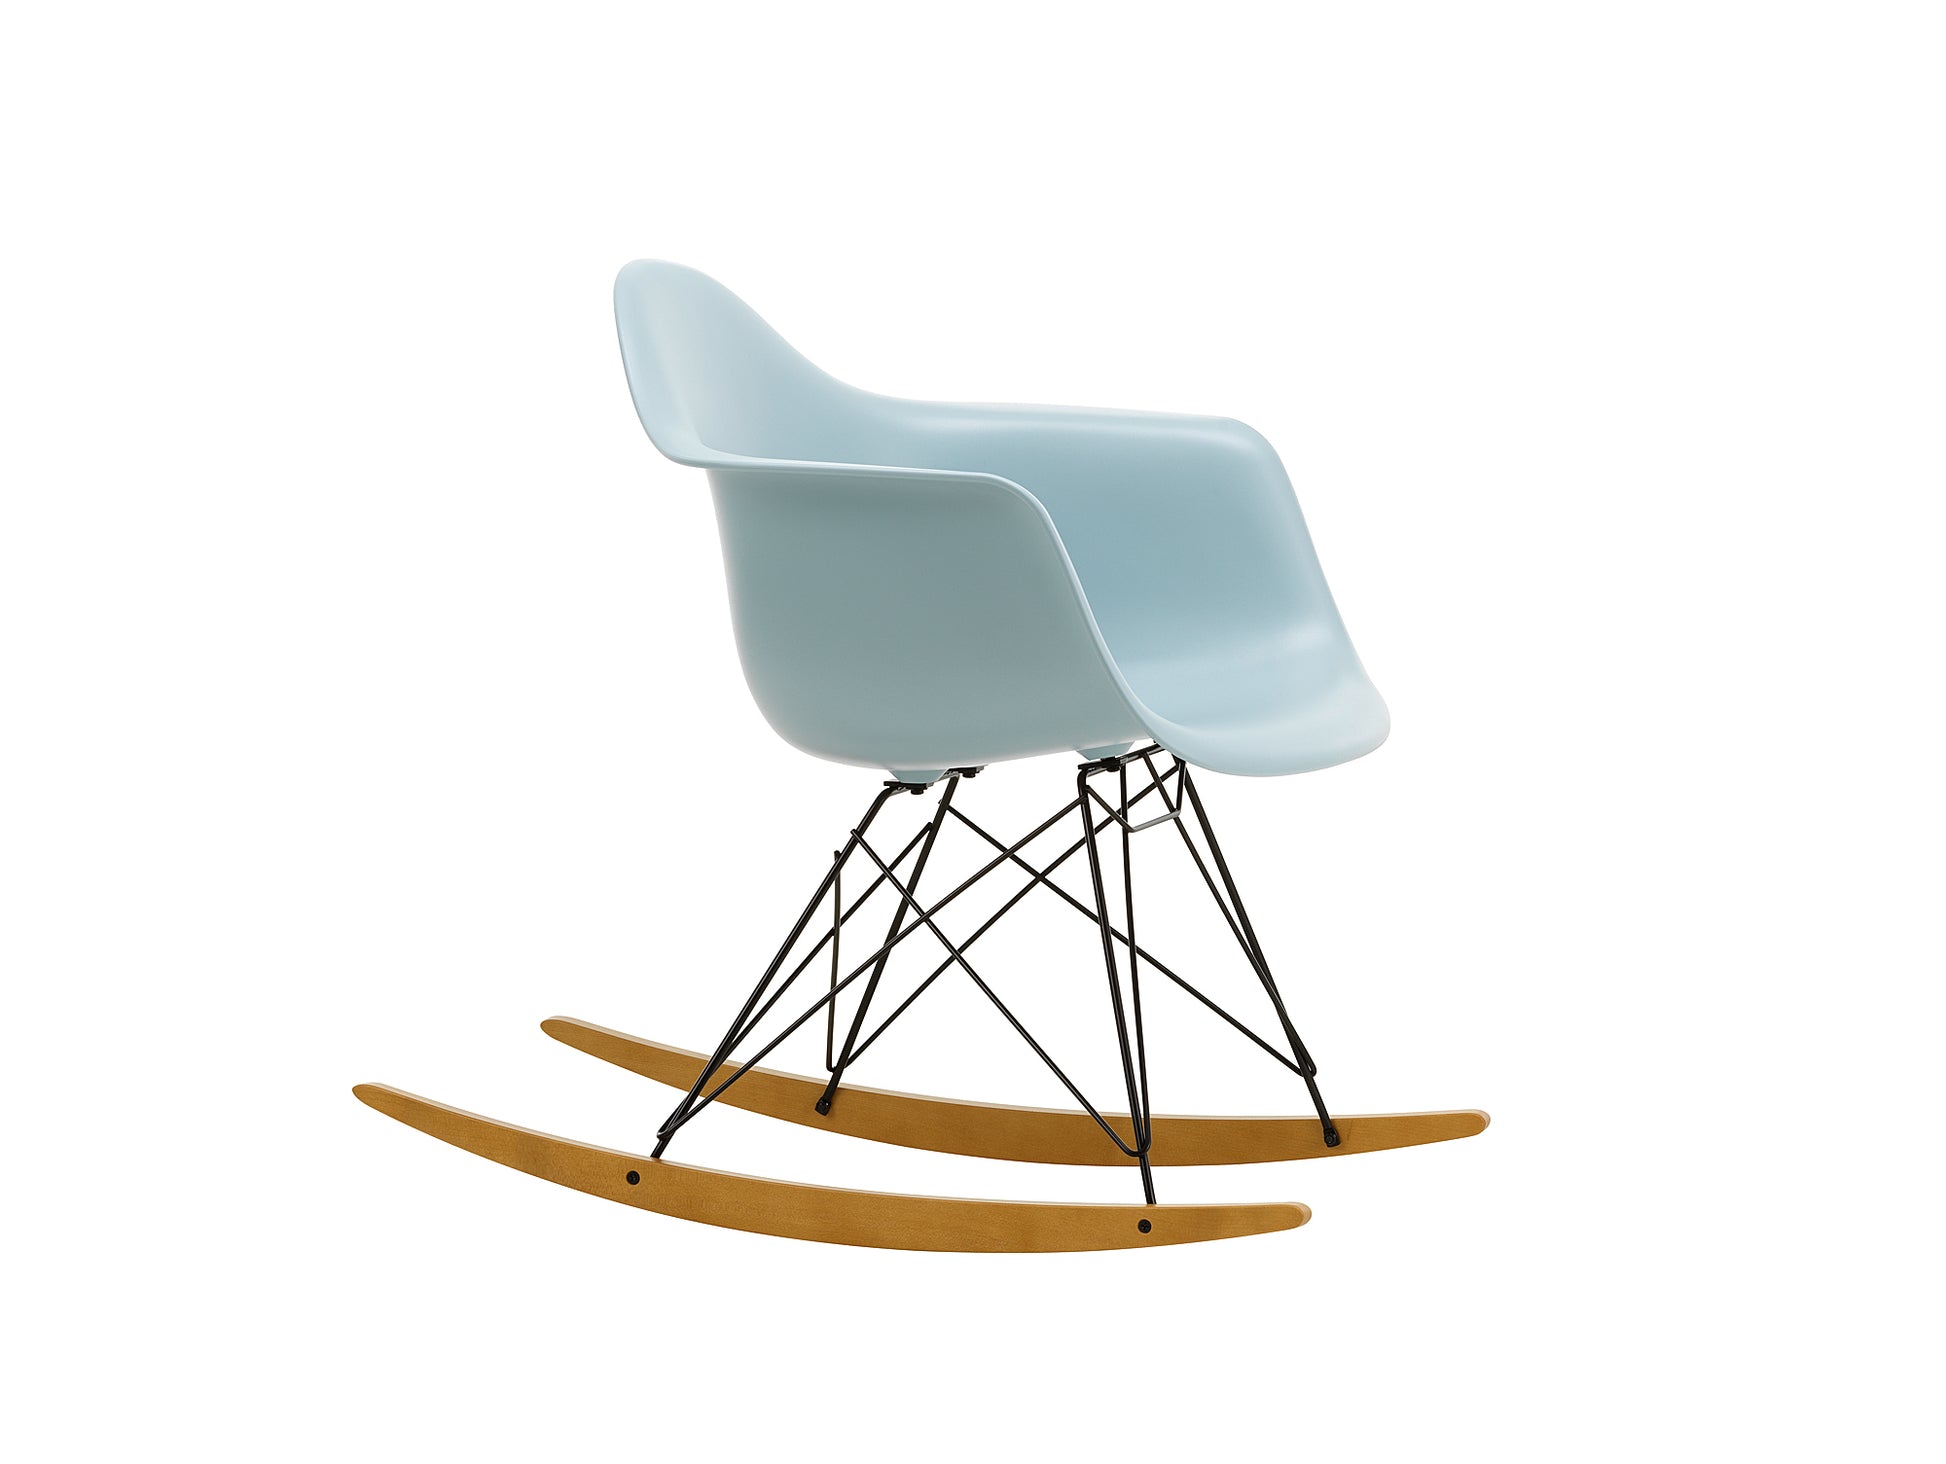 Eames RAR Plastic Armchair in Ice Grey with Basic Dark Base and Golden Maple Rockers by Vitra